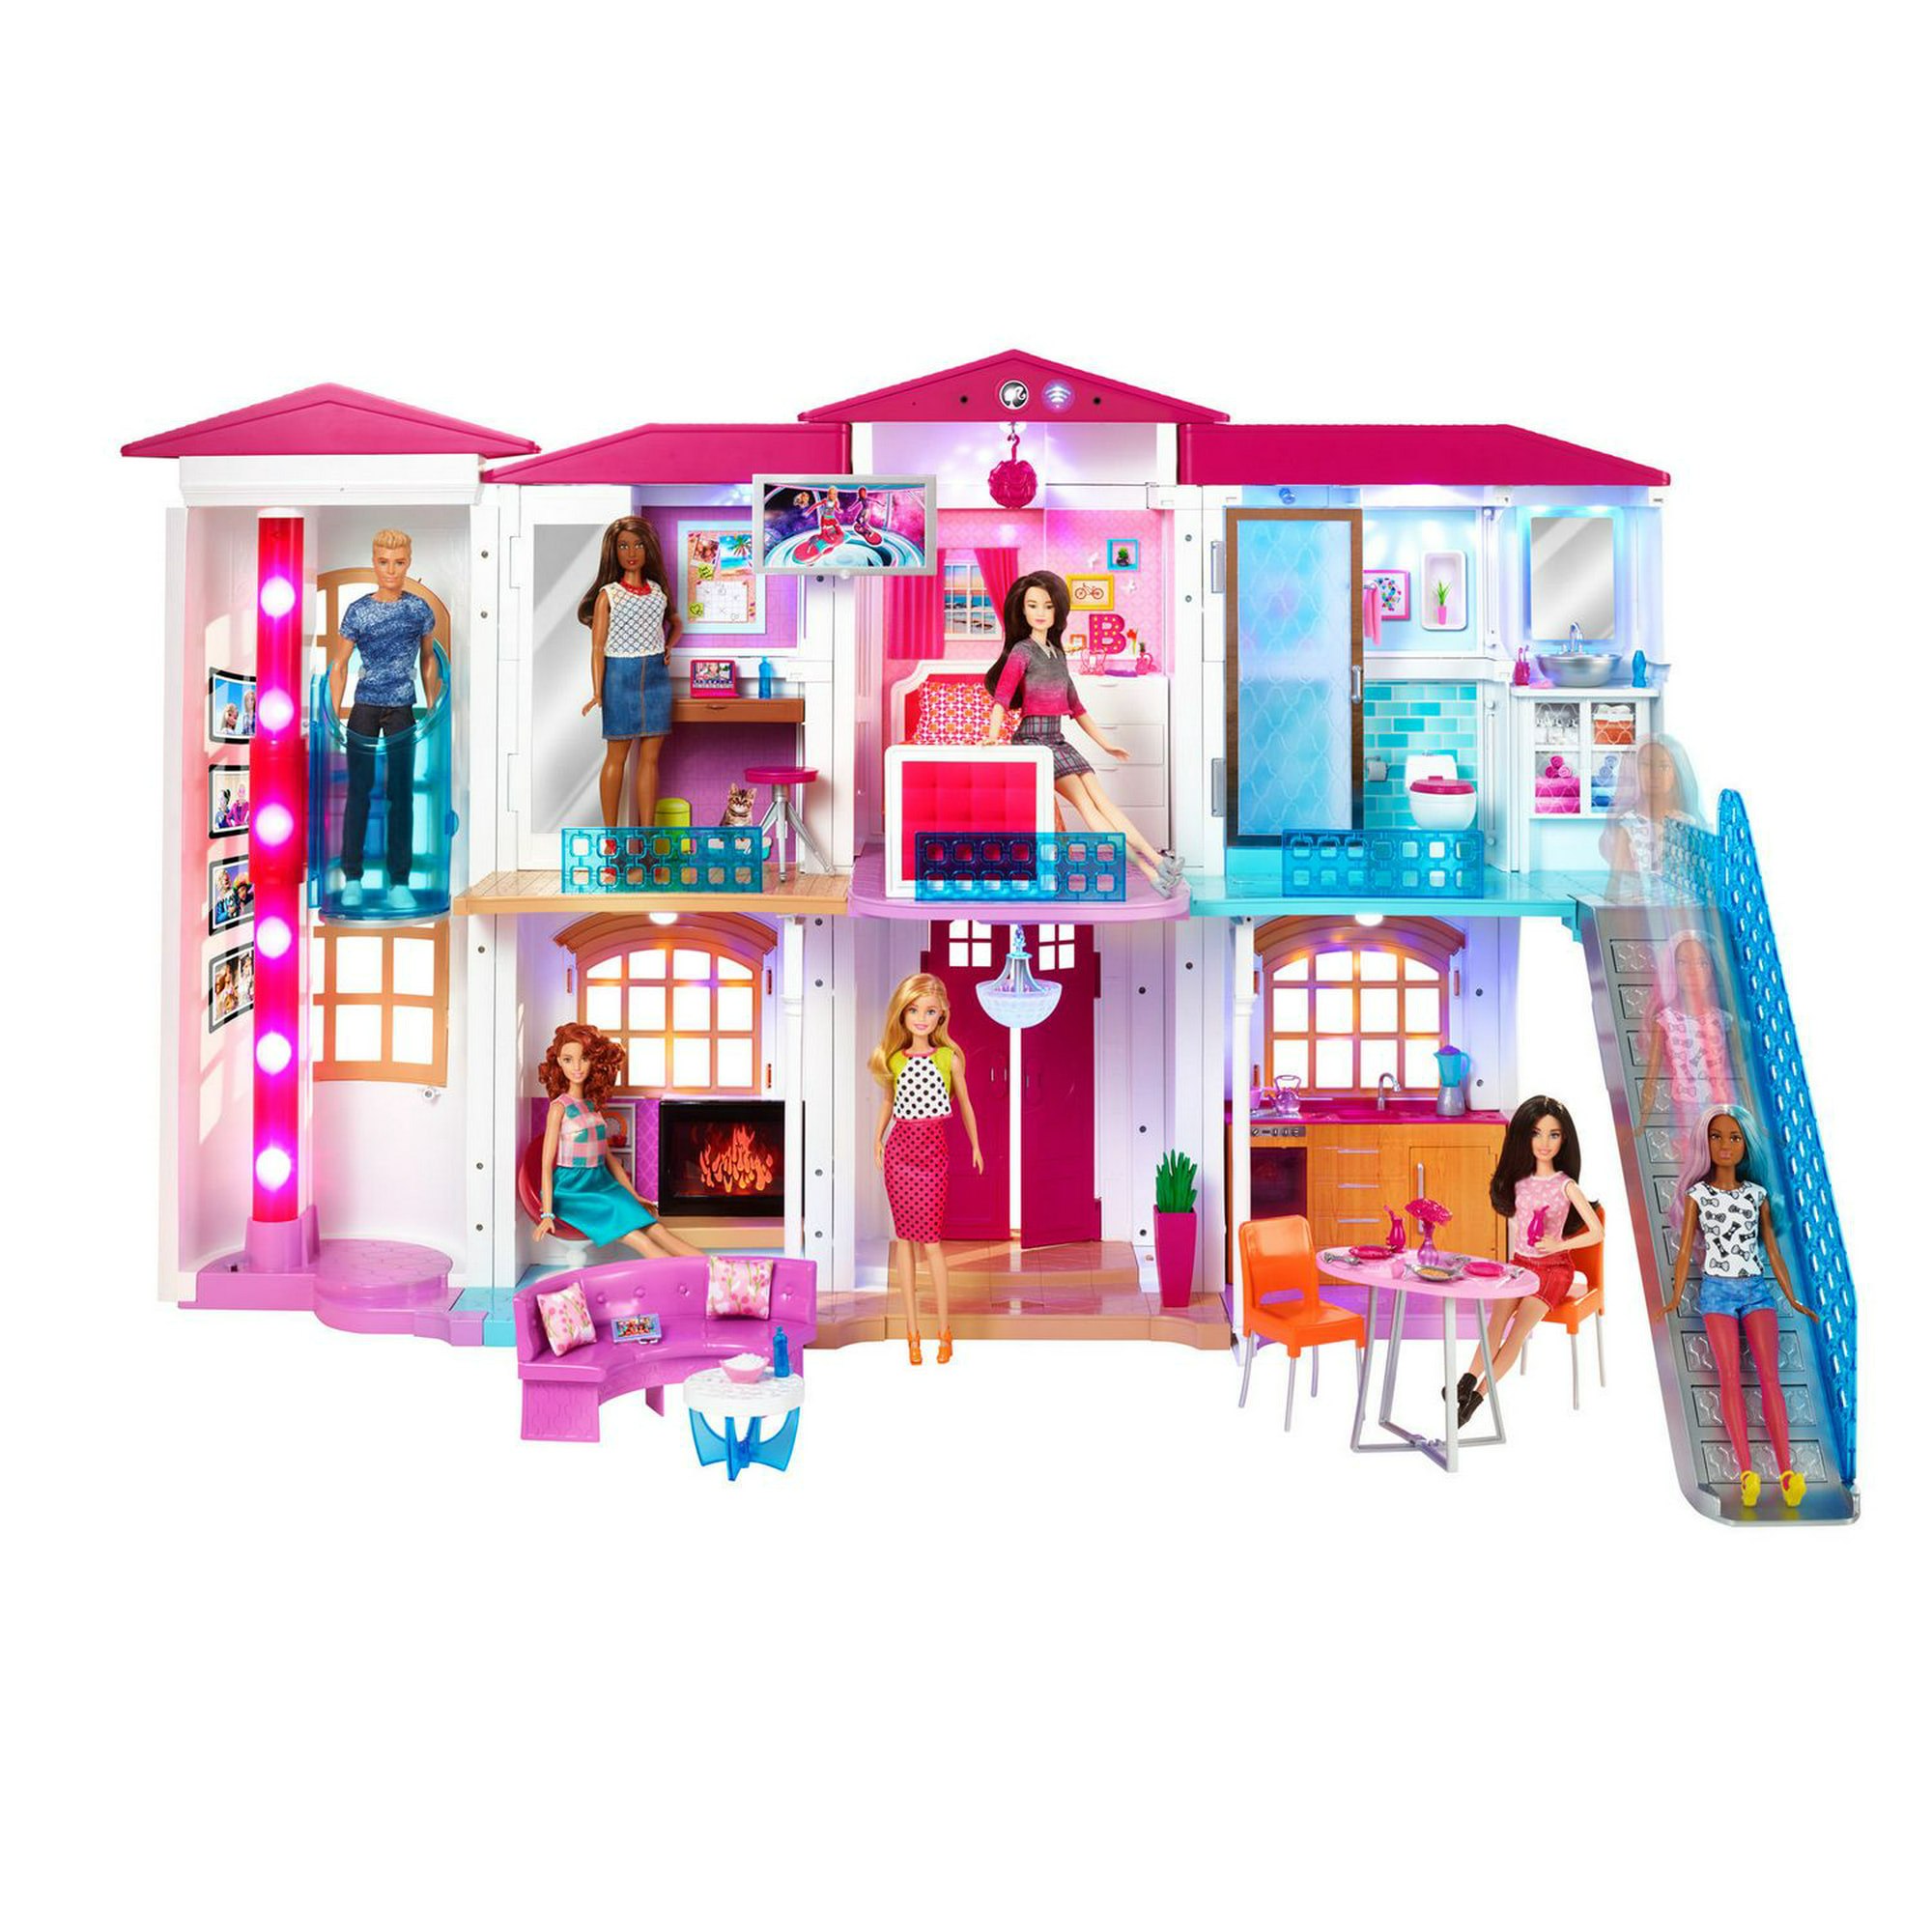 Walmart Clearance: Barbie Dreamhouse Possibly ONLY $30 (Regularly $176)